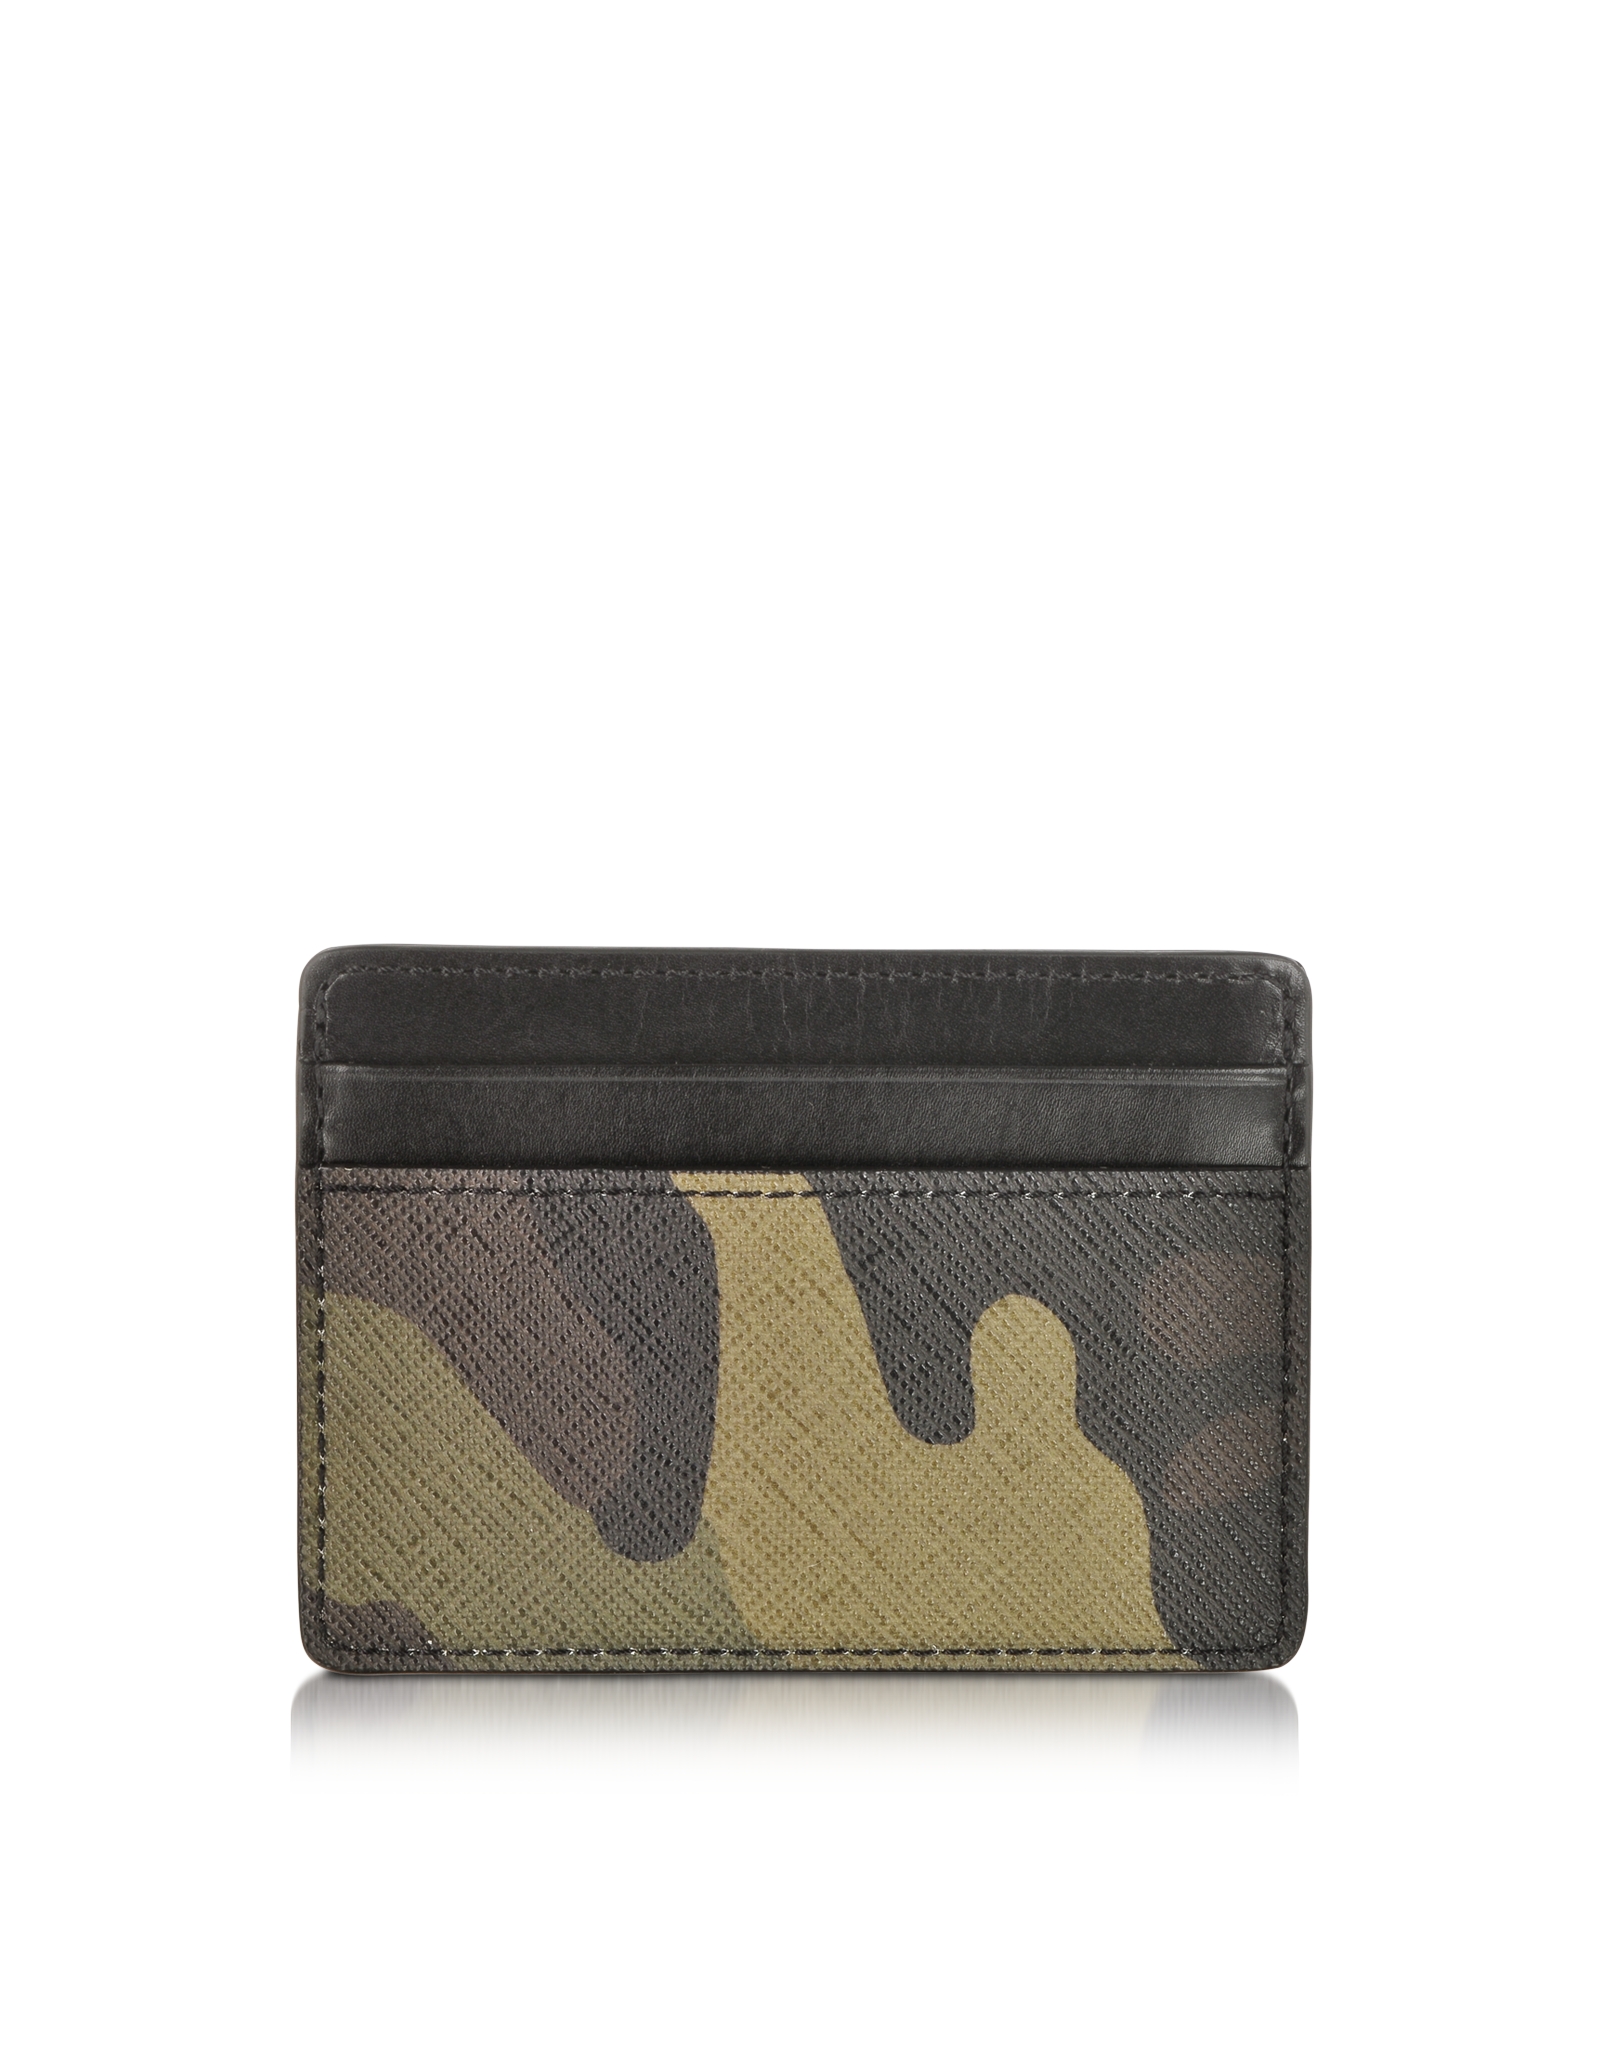 Michael kors Camouflage Saffiano Eco Leather Card Holder in Green ...  